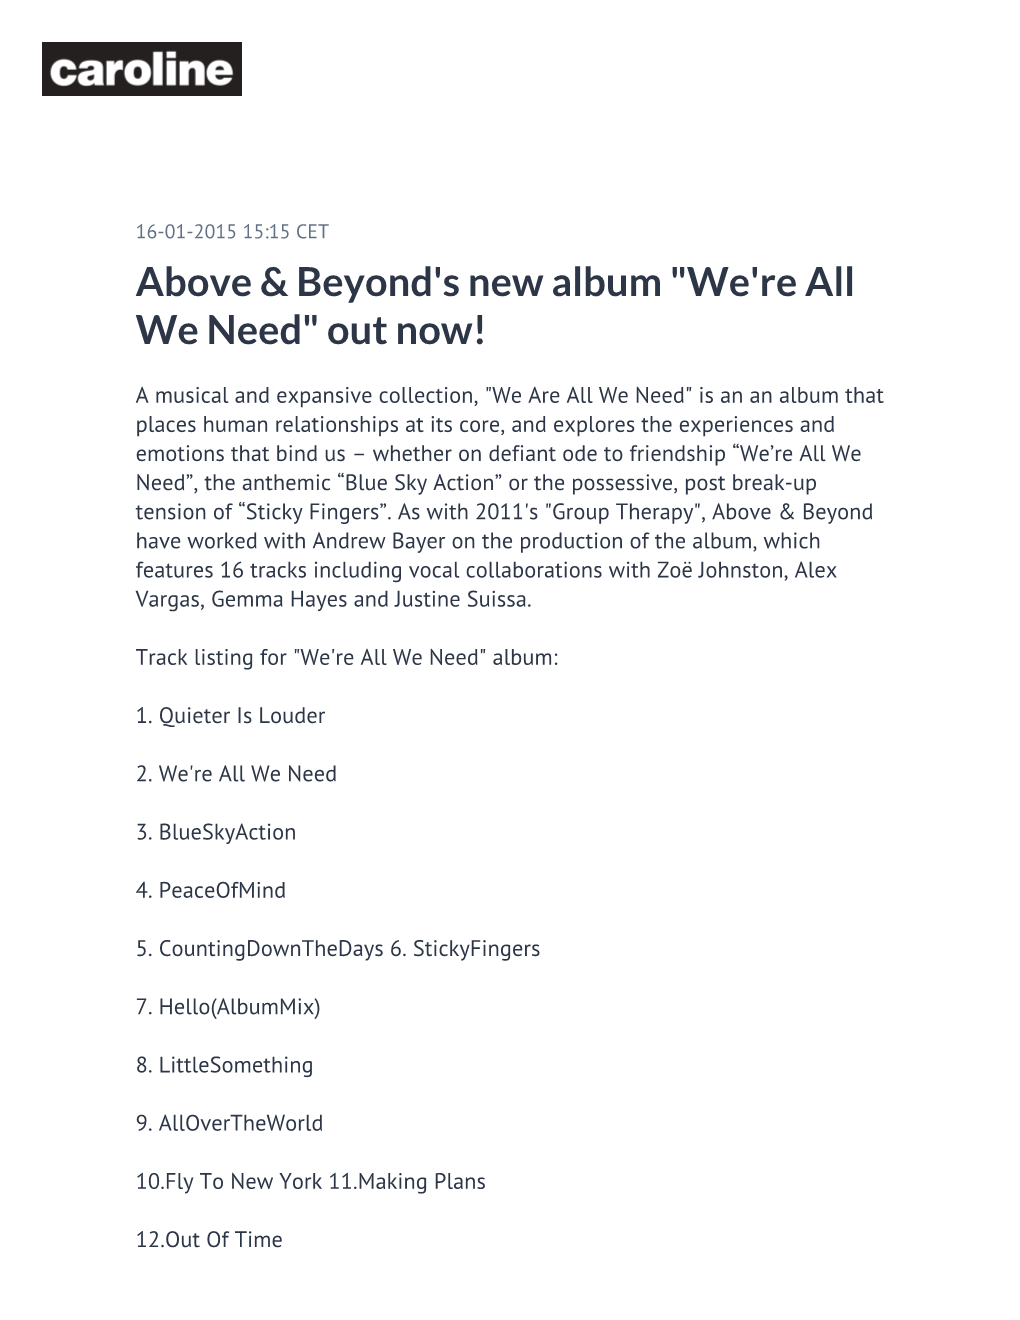 Above & Beyond's New Album "We're All We Need